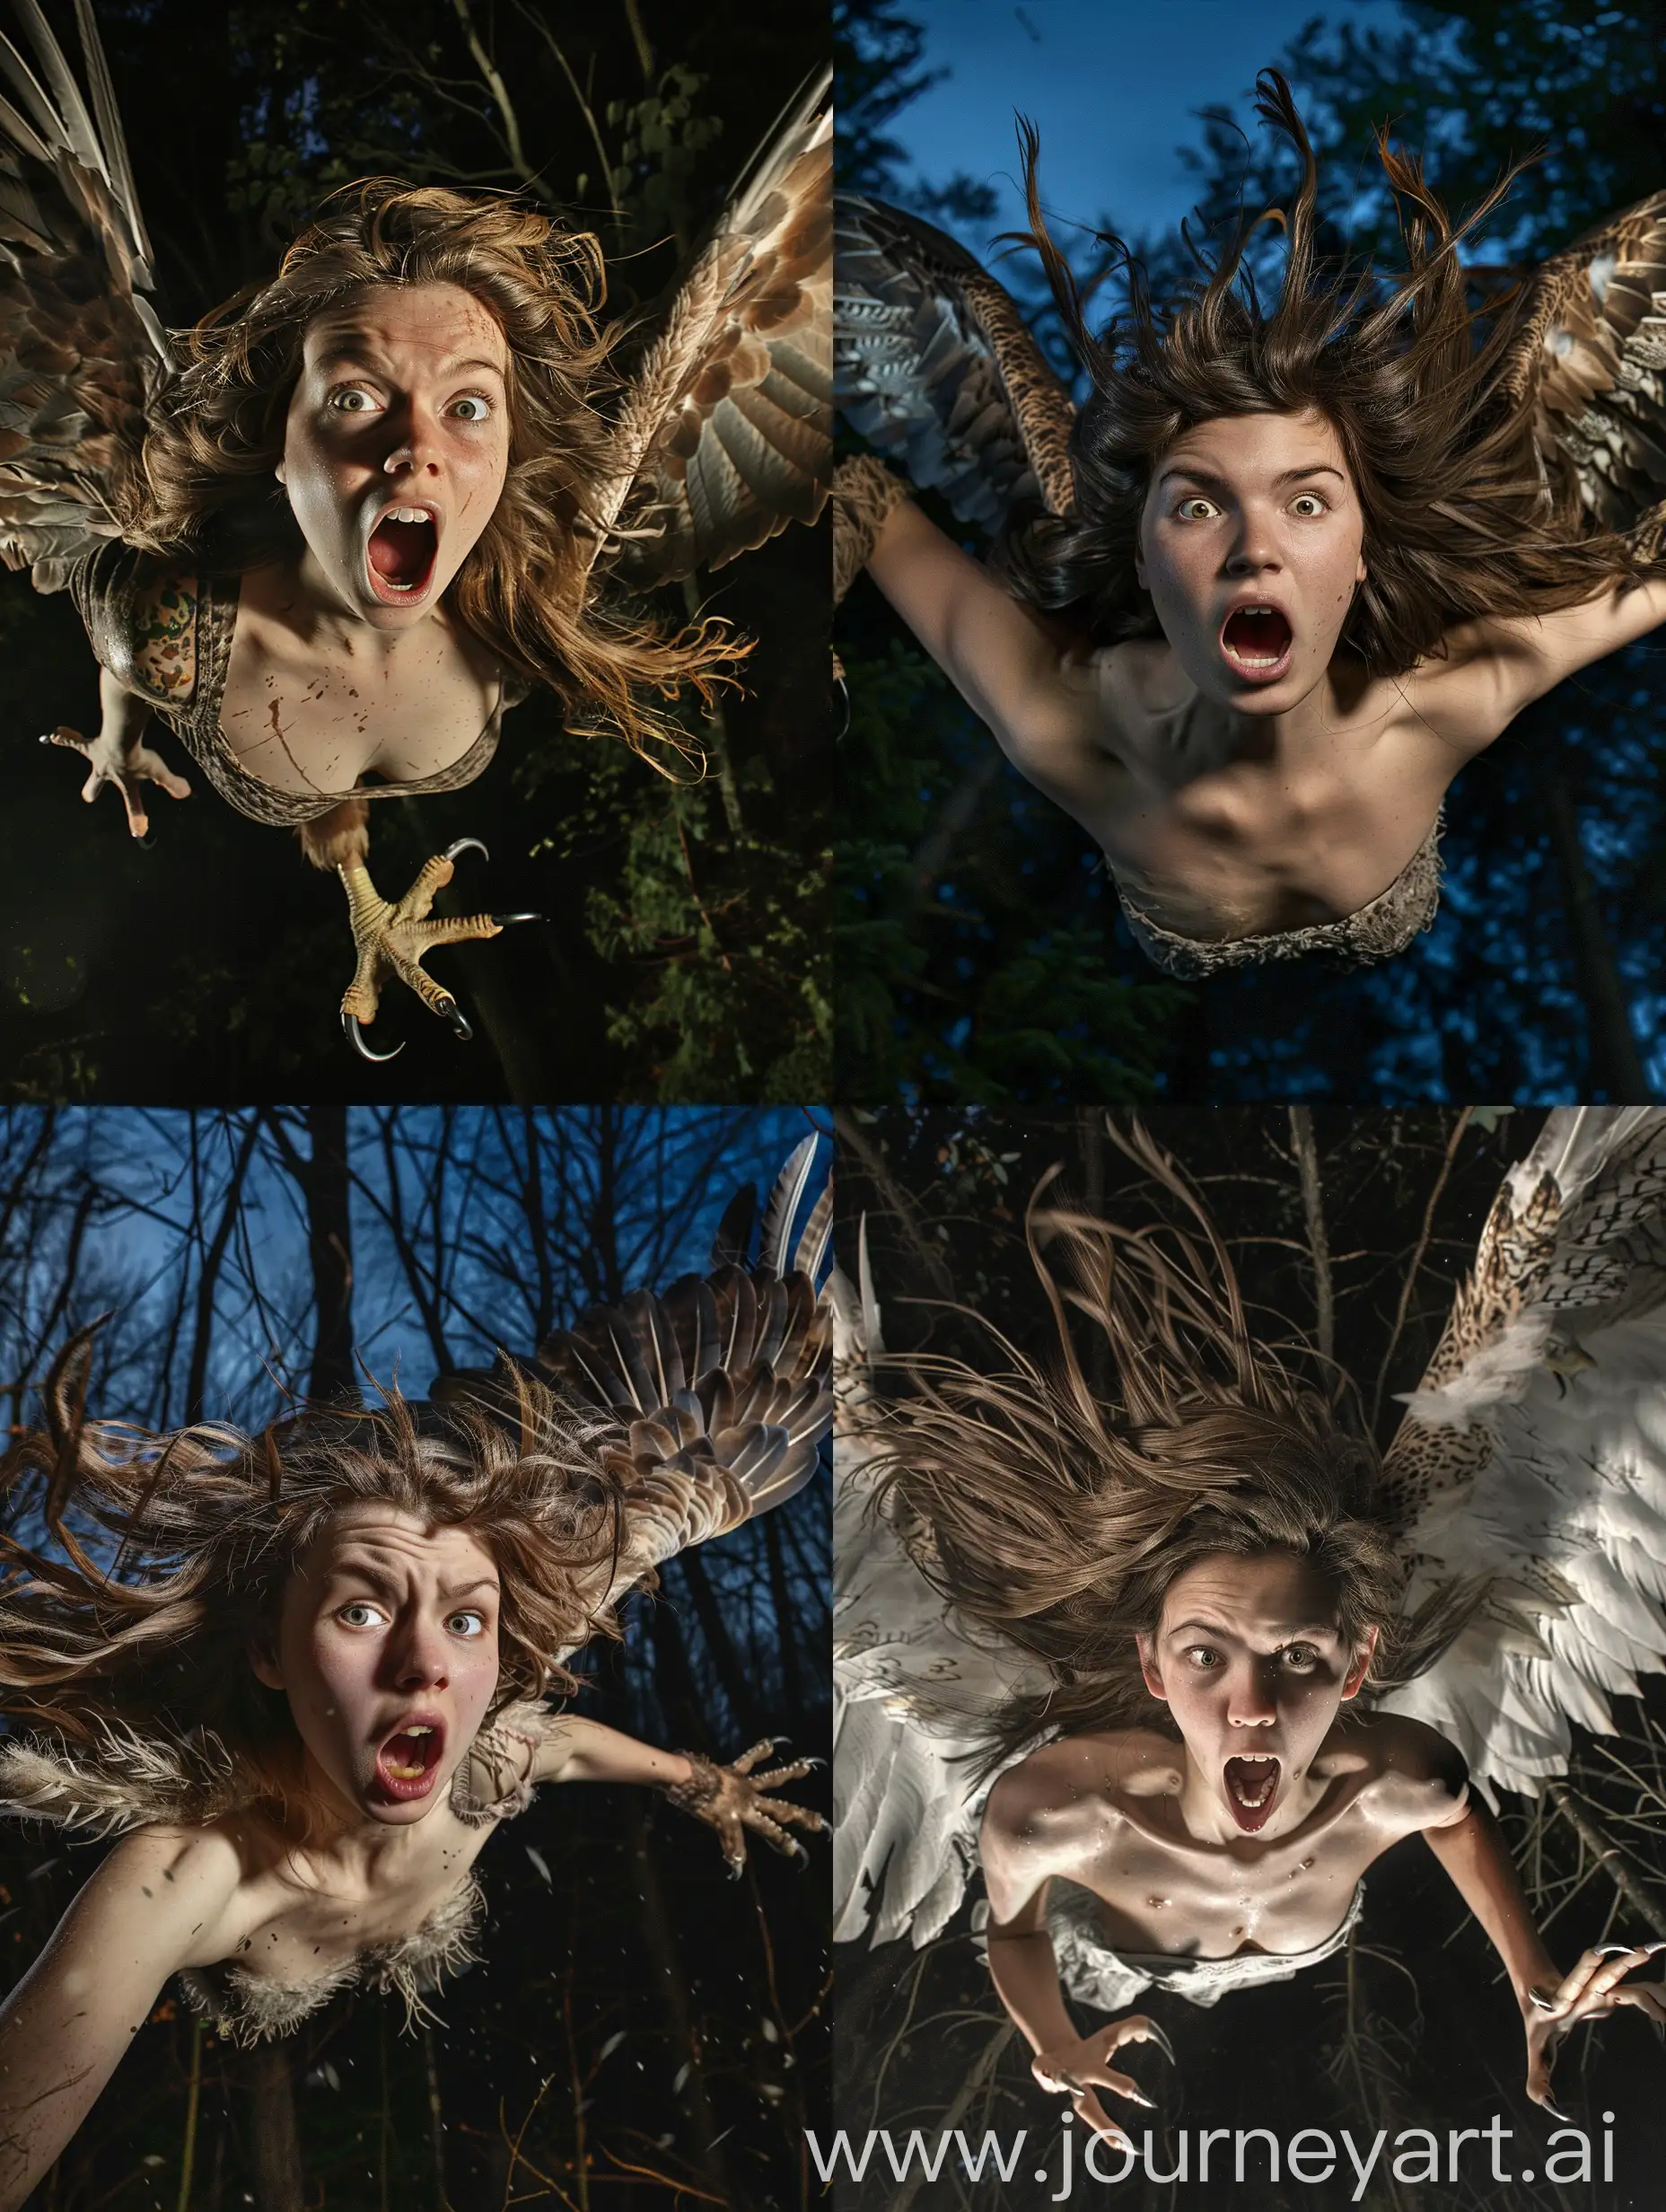 A young woman with loose brown hair, who has been transformed into an eagle. She has a beak, wings, feathers and claws. She is flying over a forest at night. She has a desperate expression, screaming for help. Realistic photograph, full body picture.